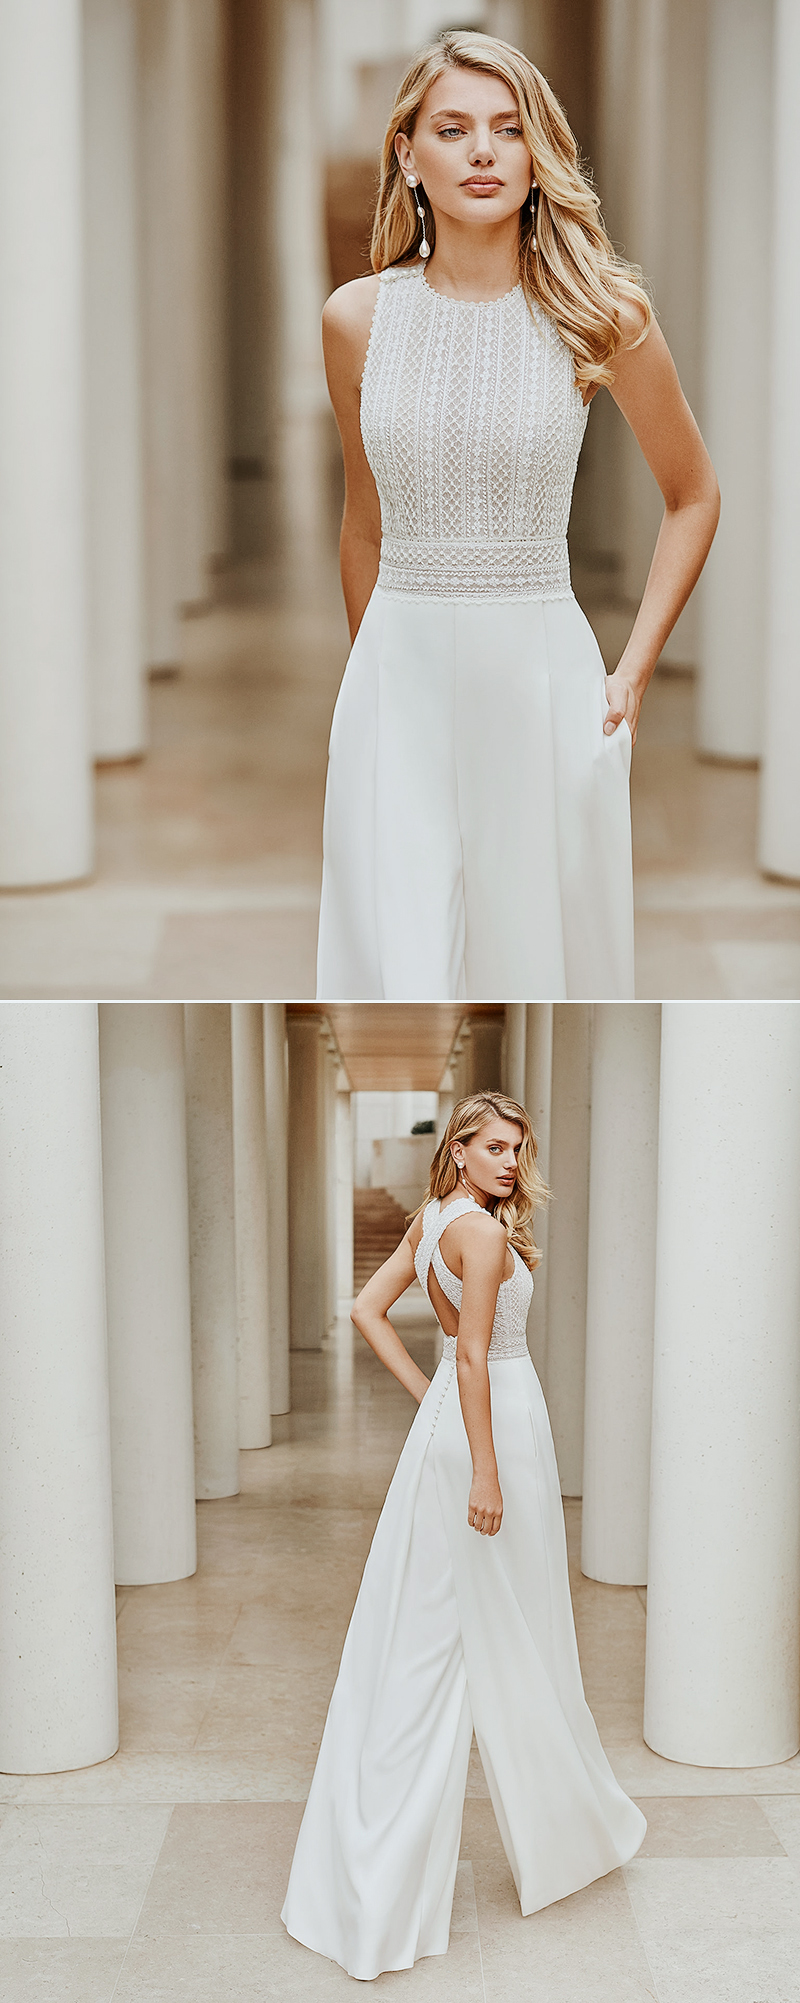 Risque Wedding Dresses with Pockets